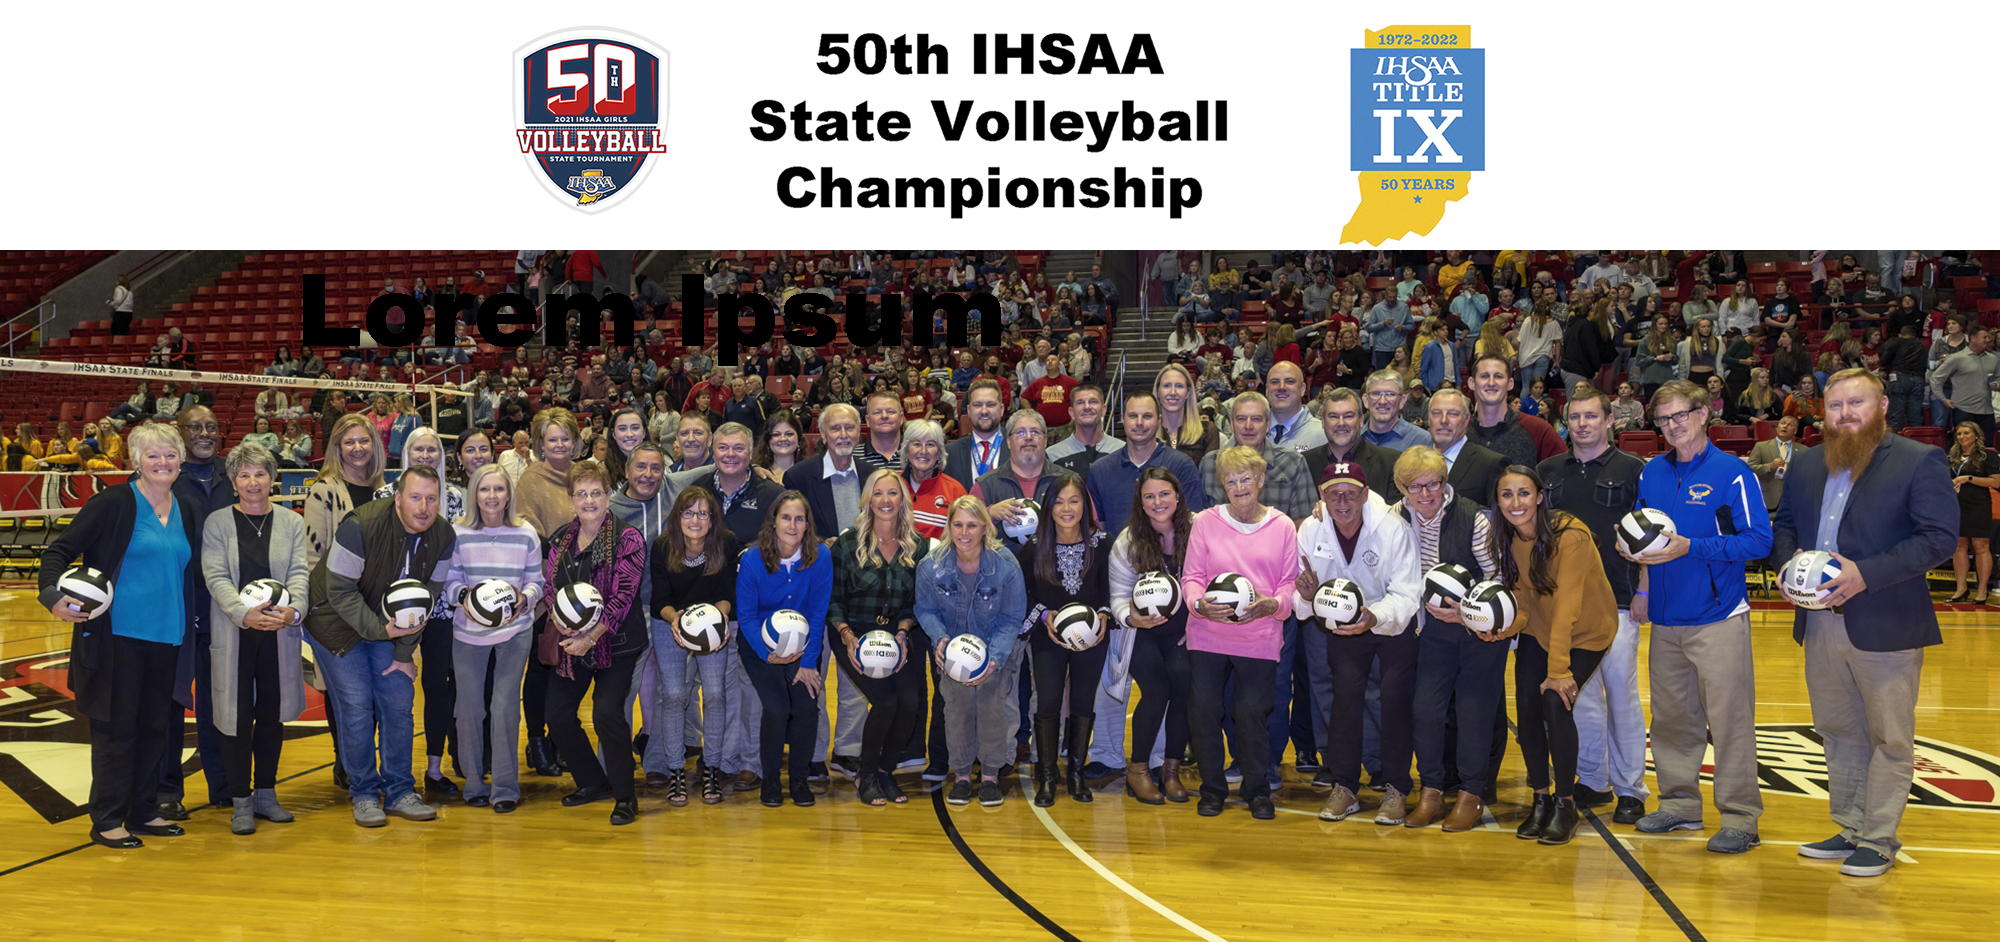 Nearly 80% of former State Champion coaches attend the 50th IHSAA State Finals